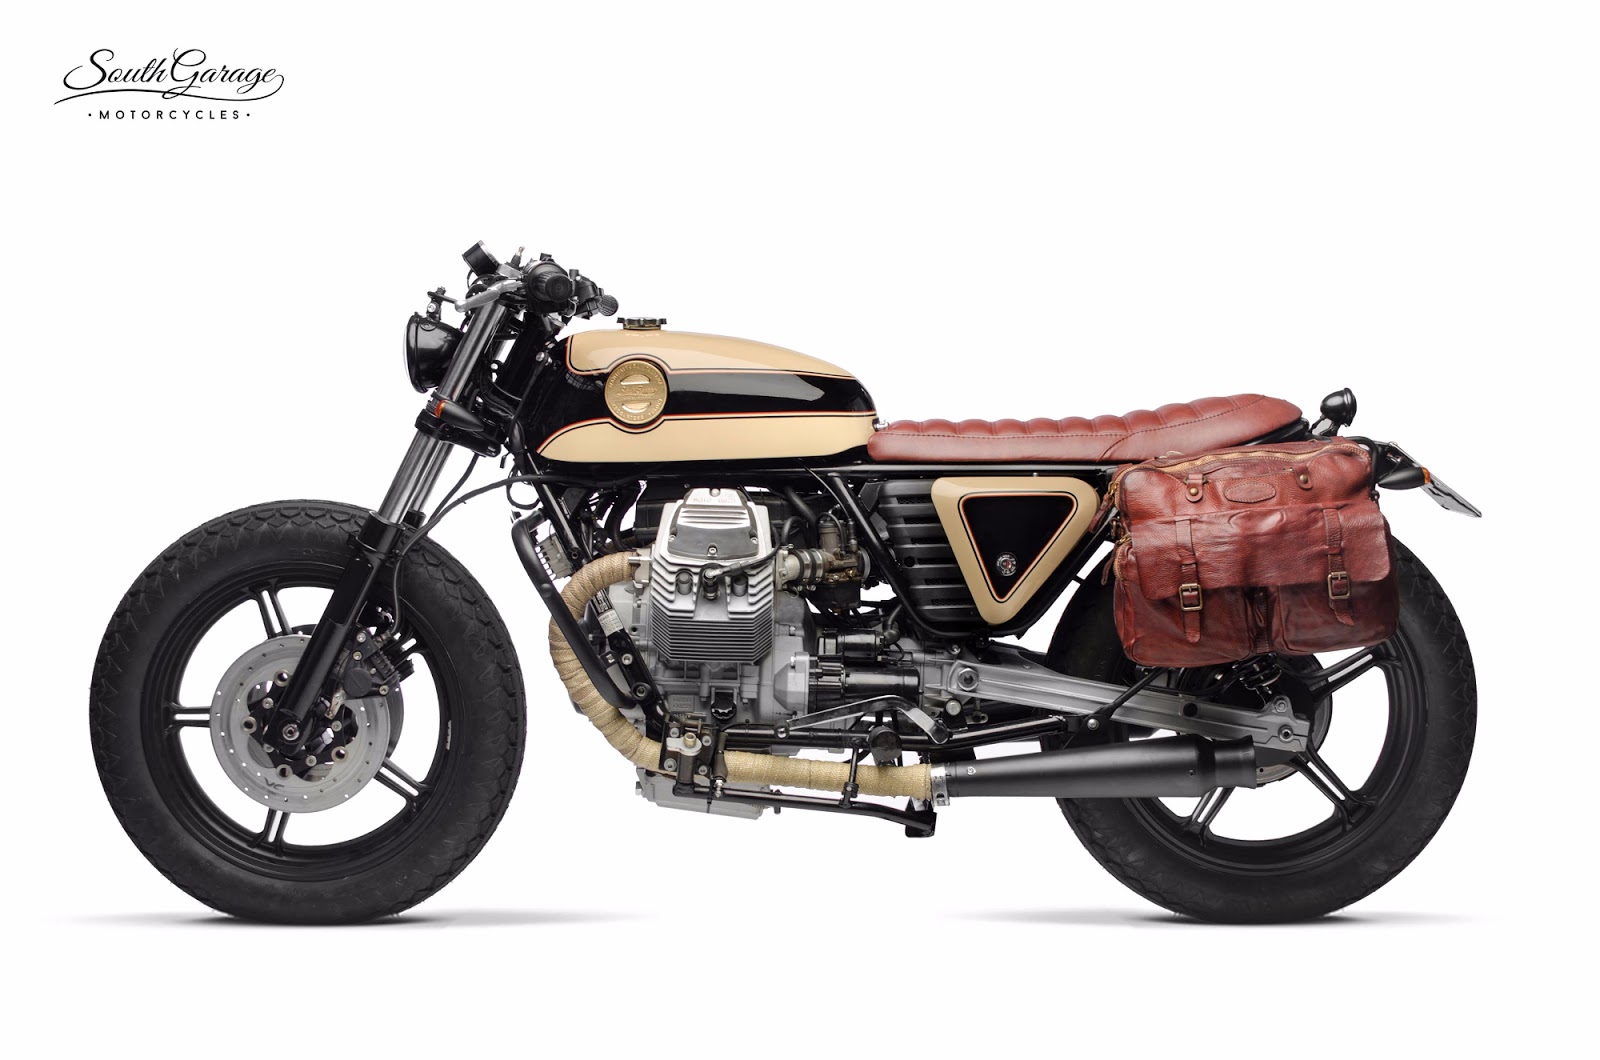 South Garage Moto Co - Return of the Cafe Racers